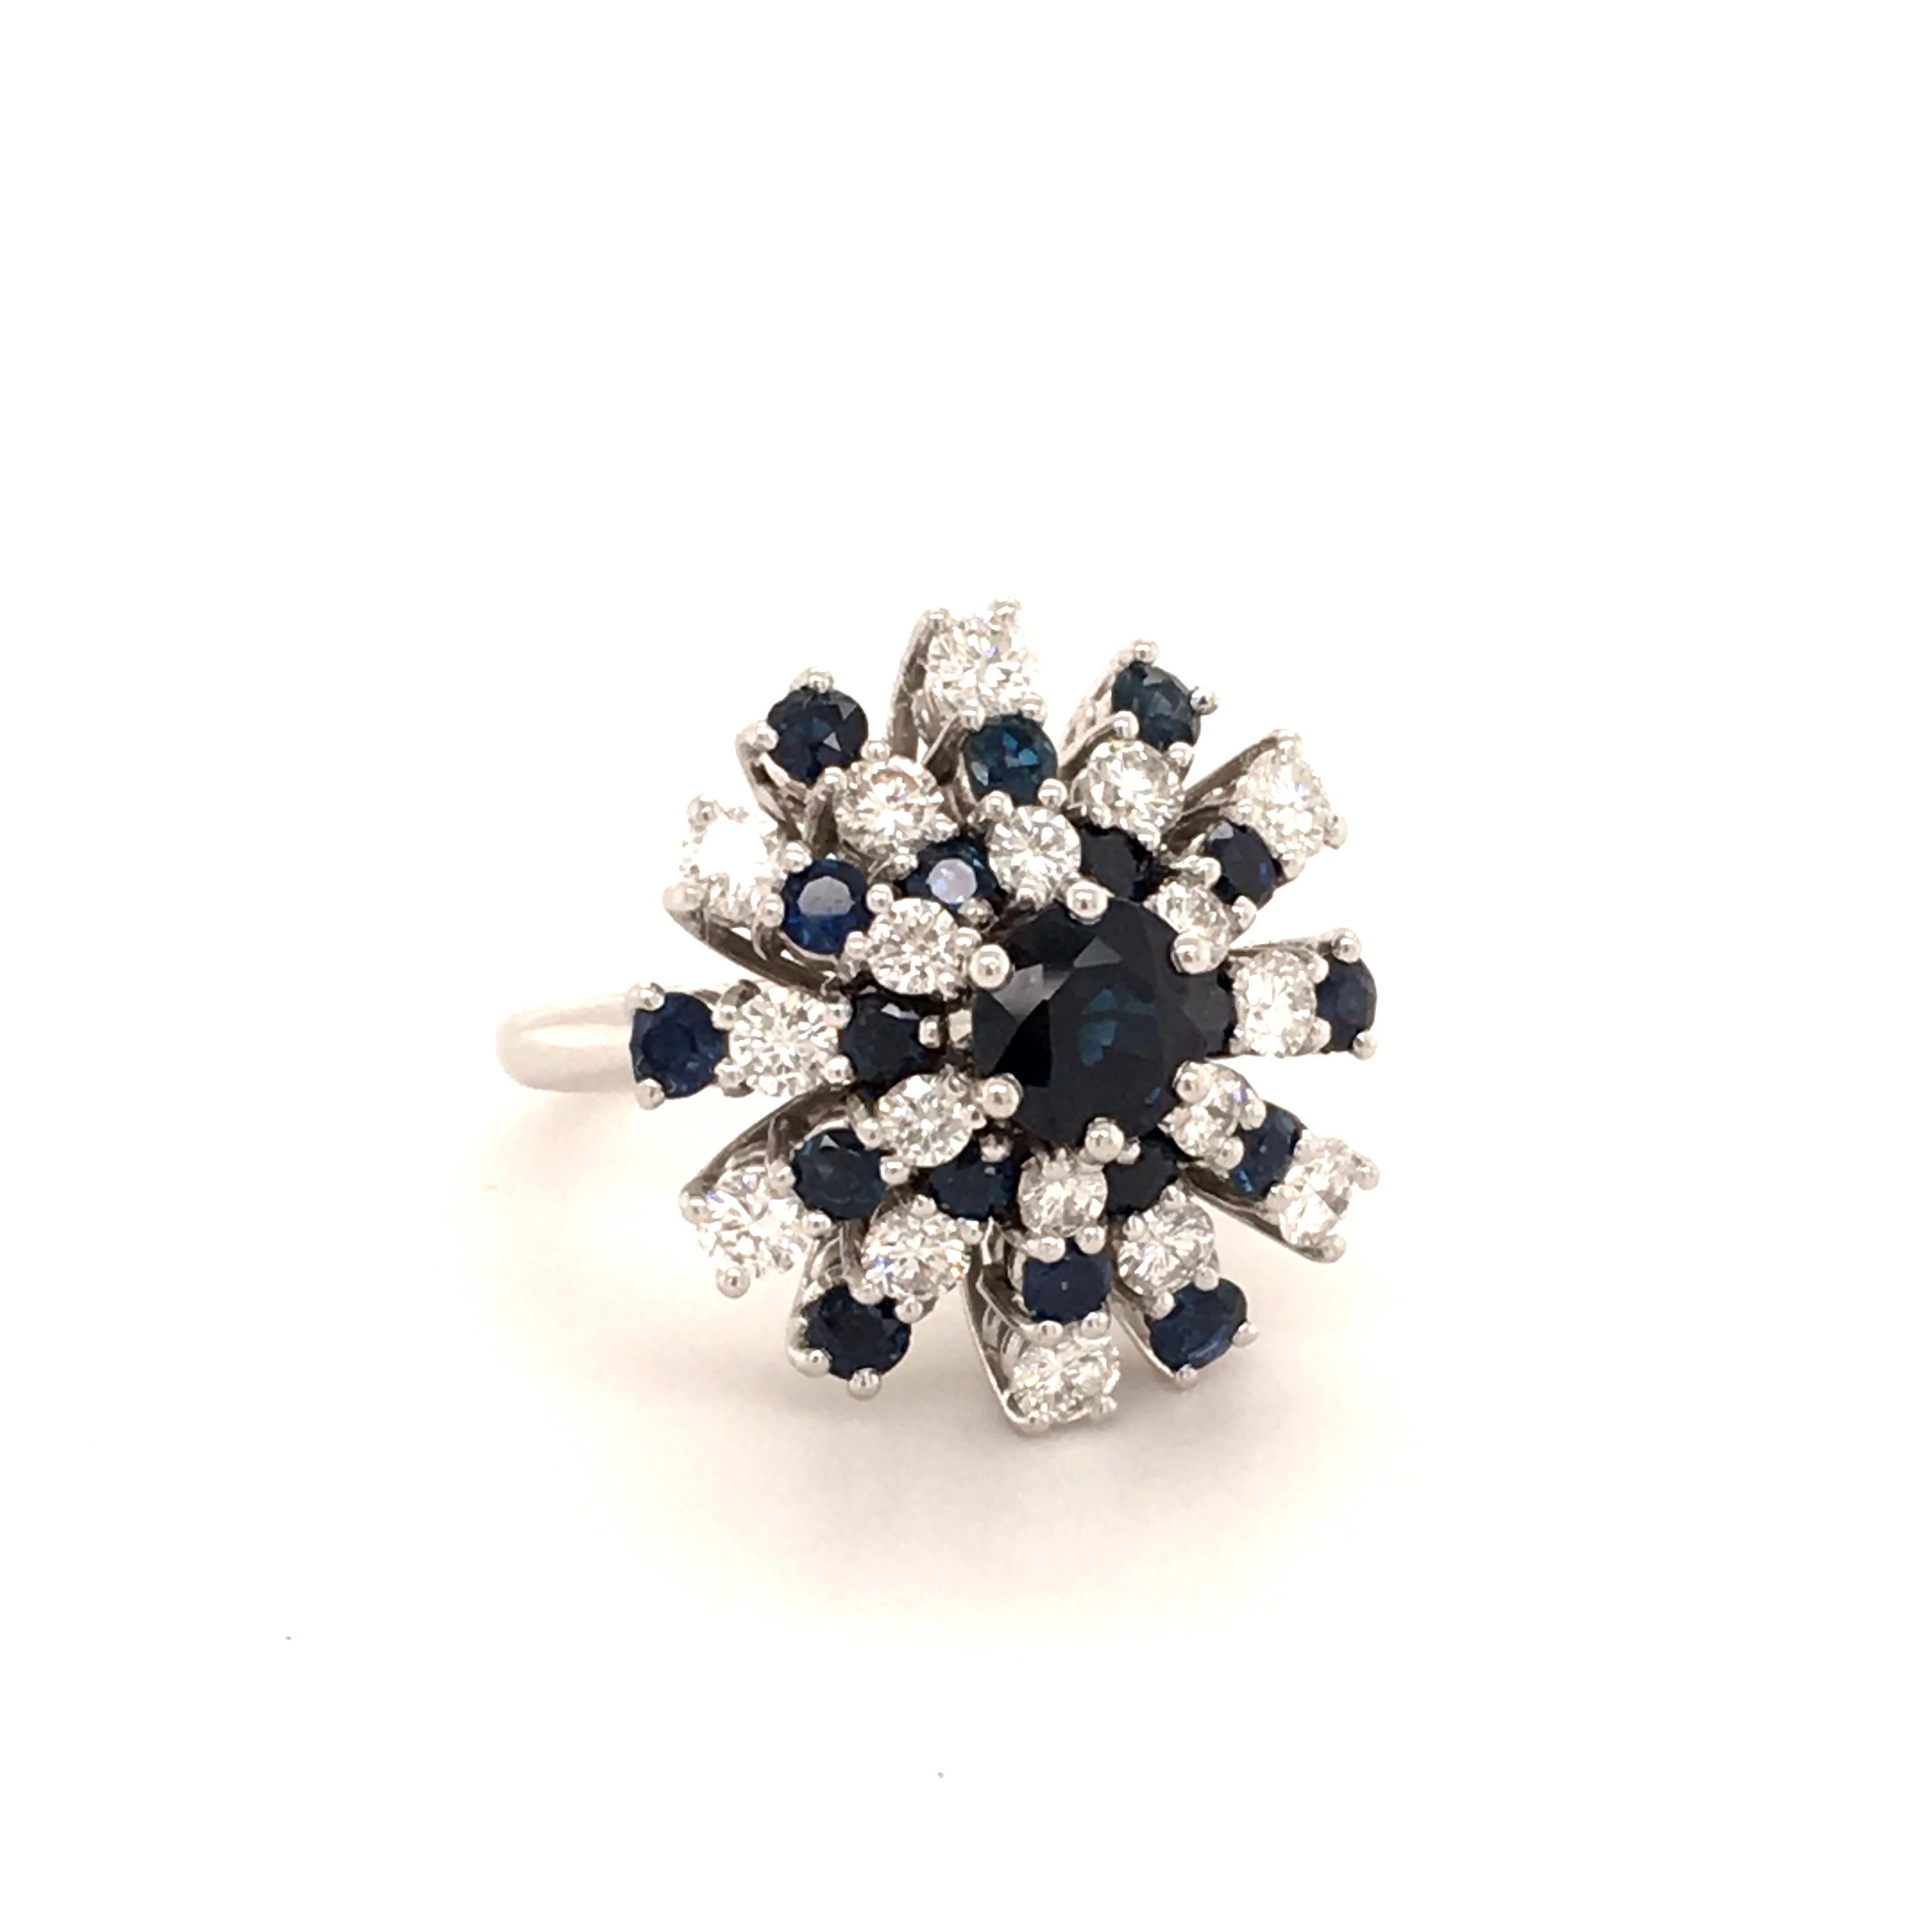 Blue sapphire and white diamond cluster ring in white gold 18K. Set in the center in six prongs with a round cut blue sapphire of approximate 0.95 ct, surrounded by 18 sapphires totalling 1.40 ct and 18 brilliant-cut diamonds of G/H-vs quality